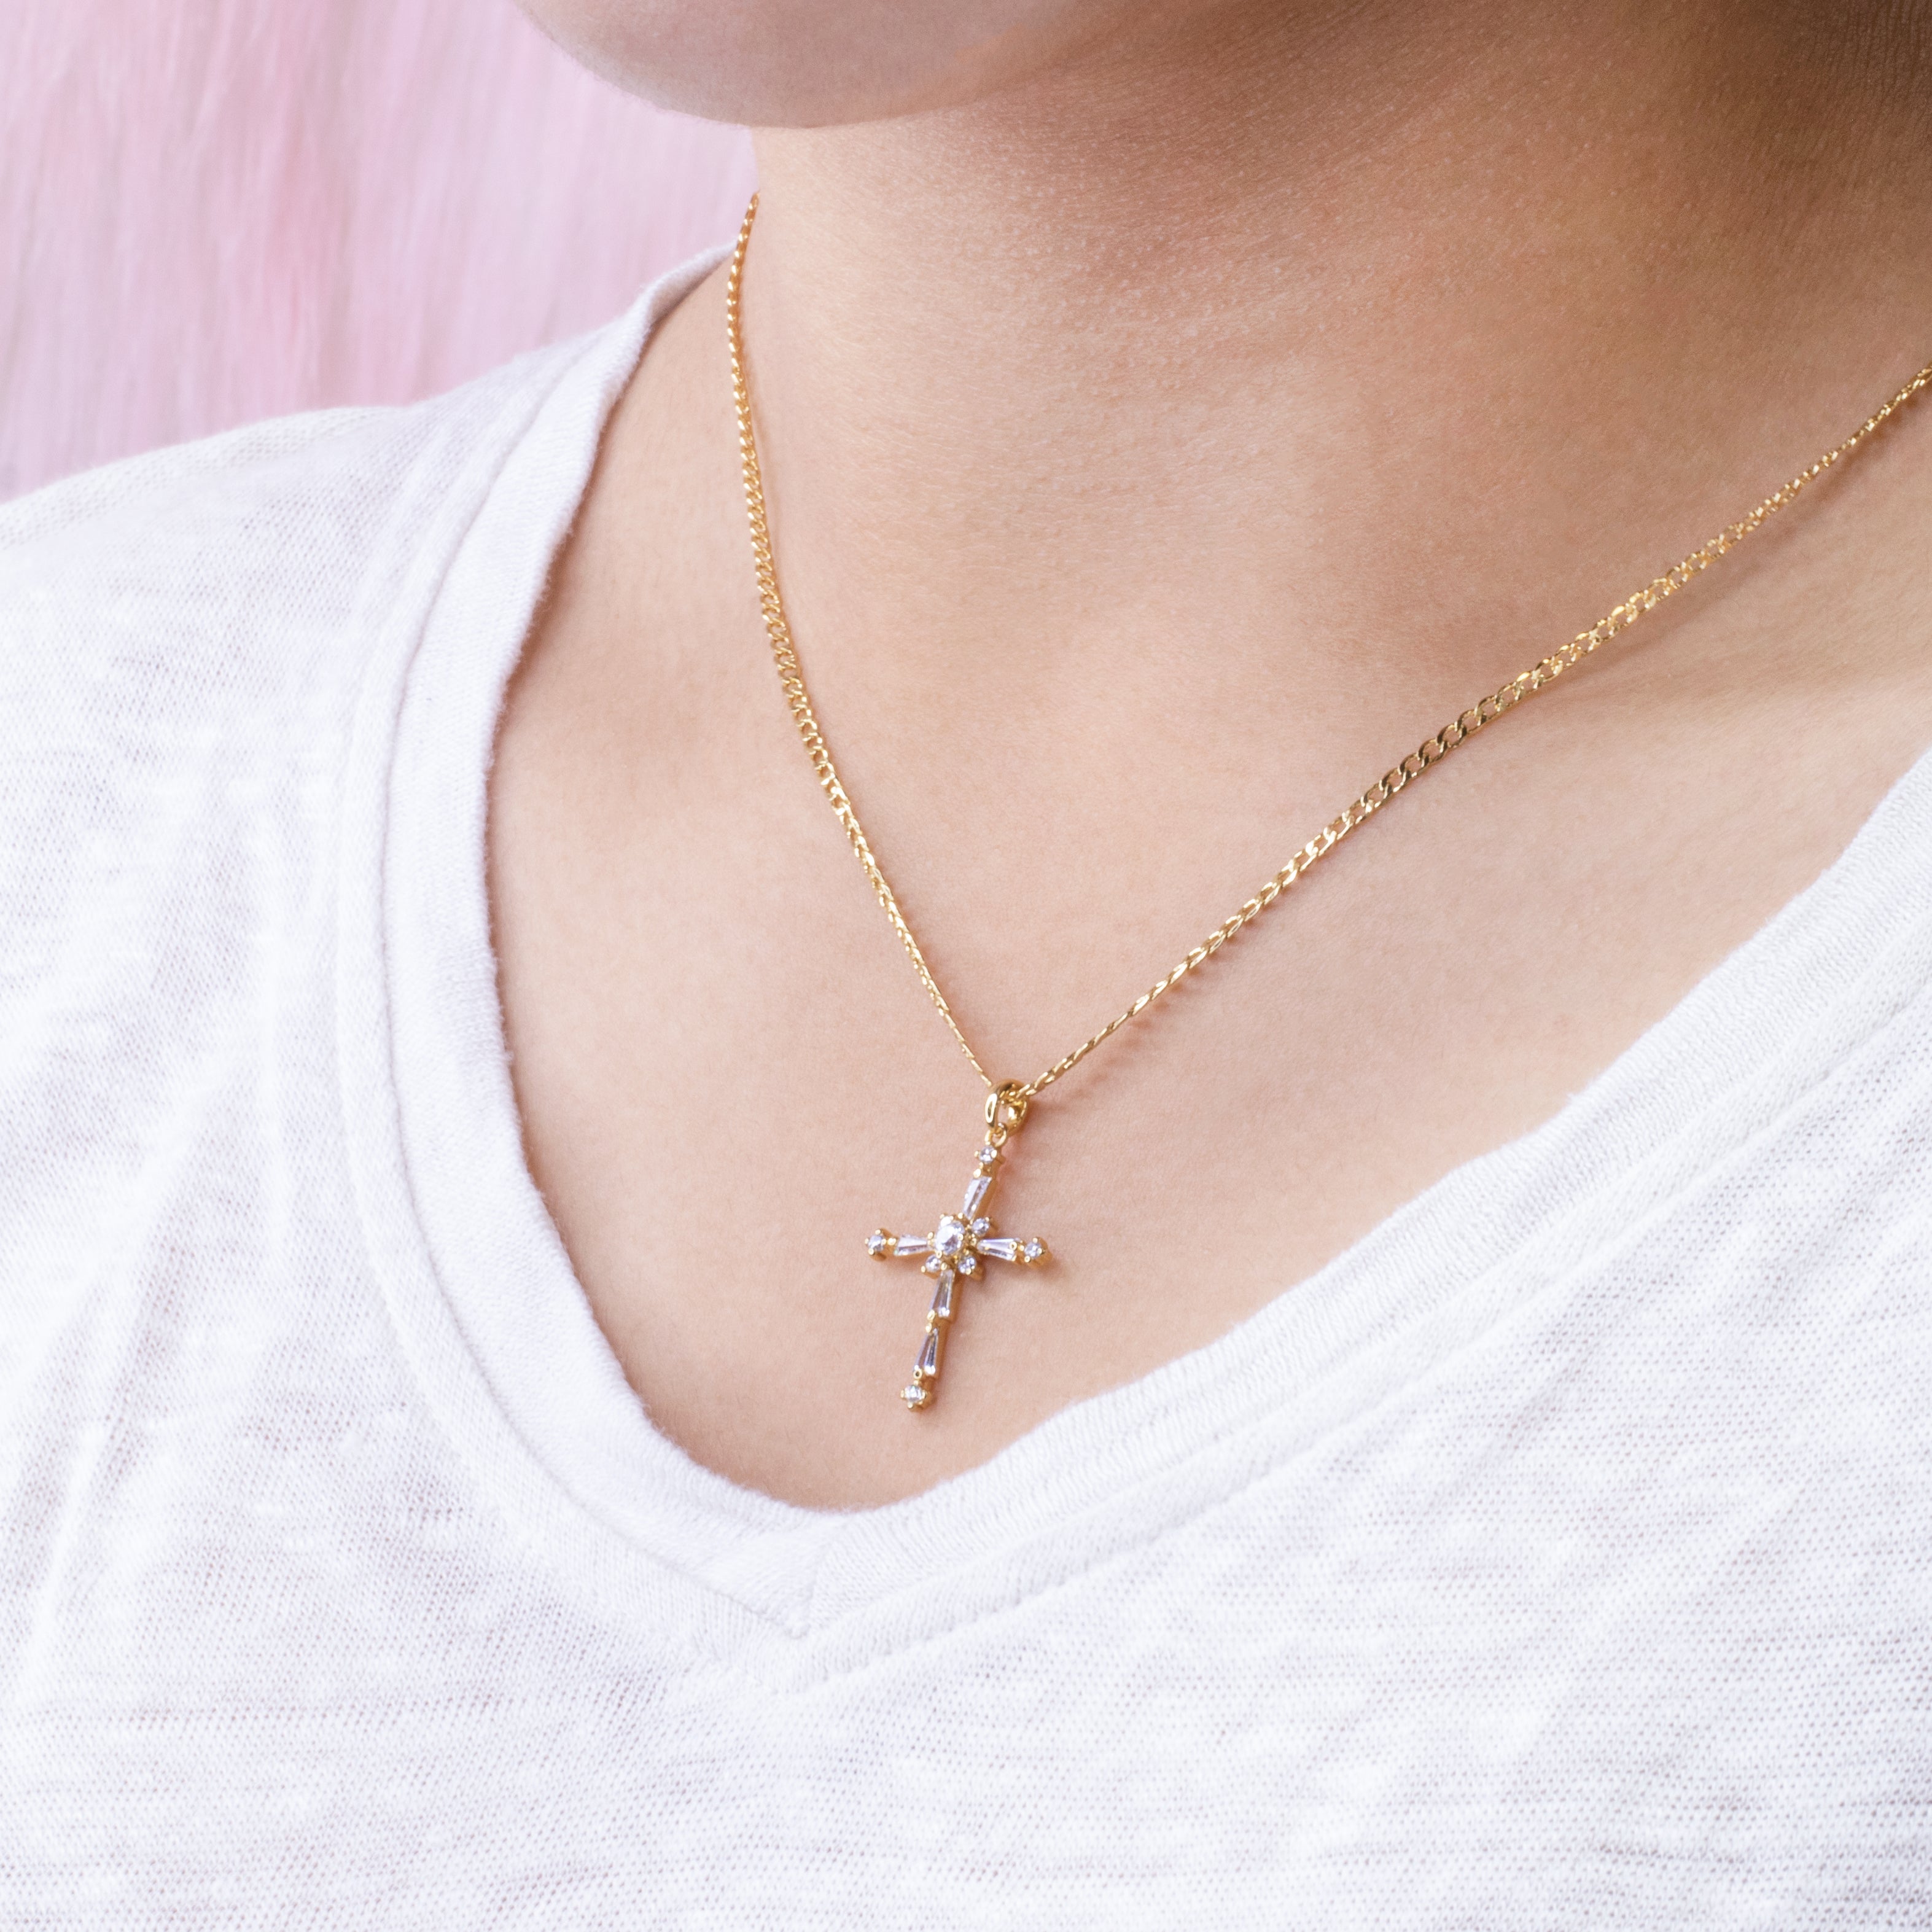 Sparkly Cross Necklace - Clear Gemstone Cross Necklace Gift For